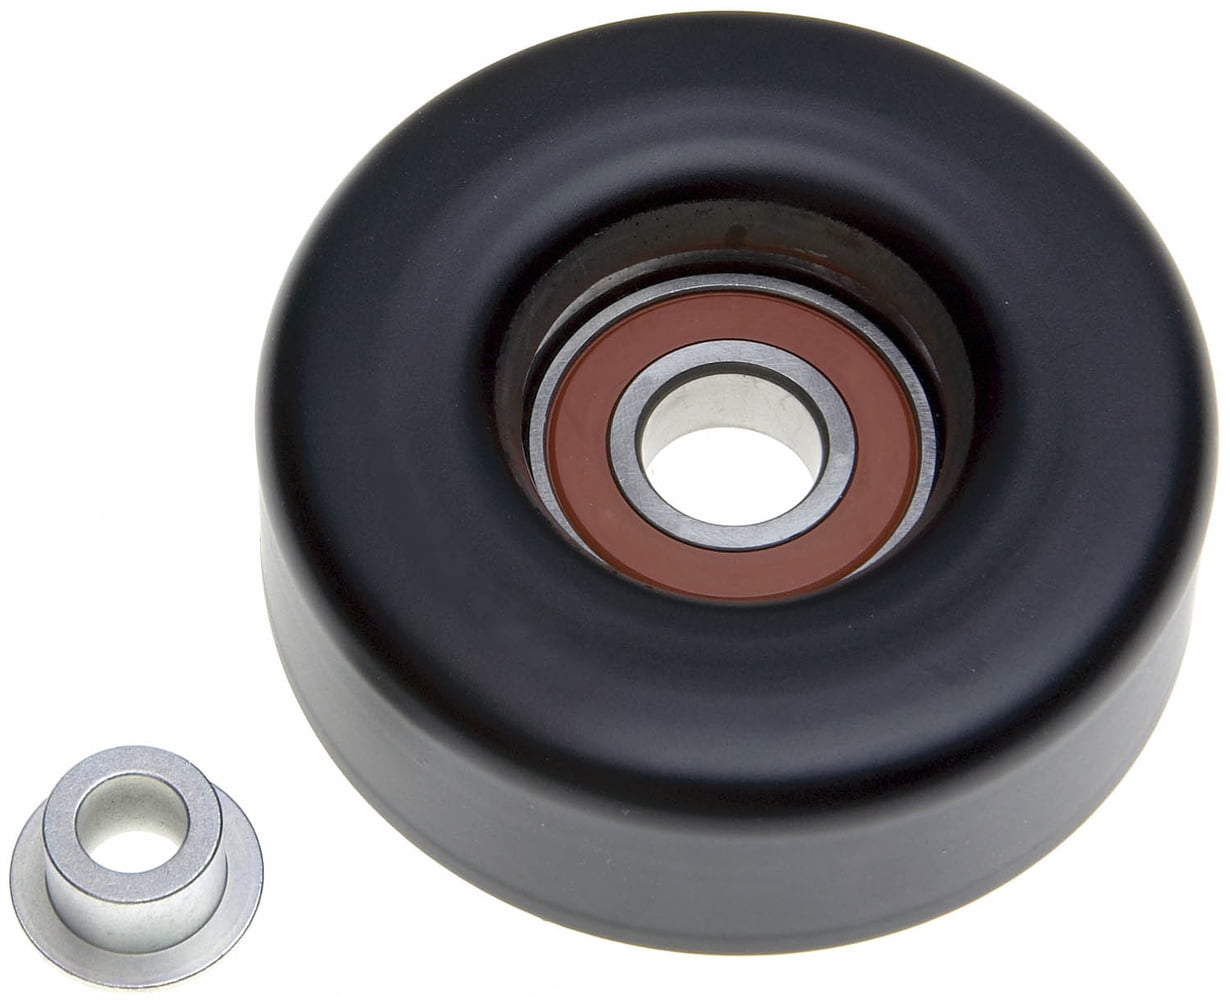 Accessory Drive Belt Tensioner Pulley-DriveAlign Premium OE Pulley Gates 38009